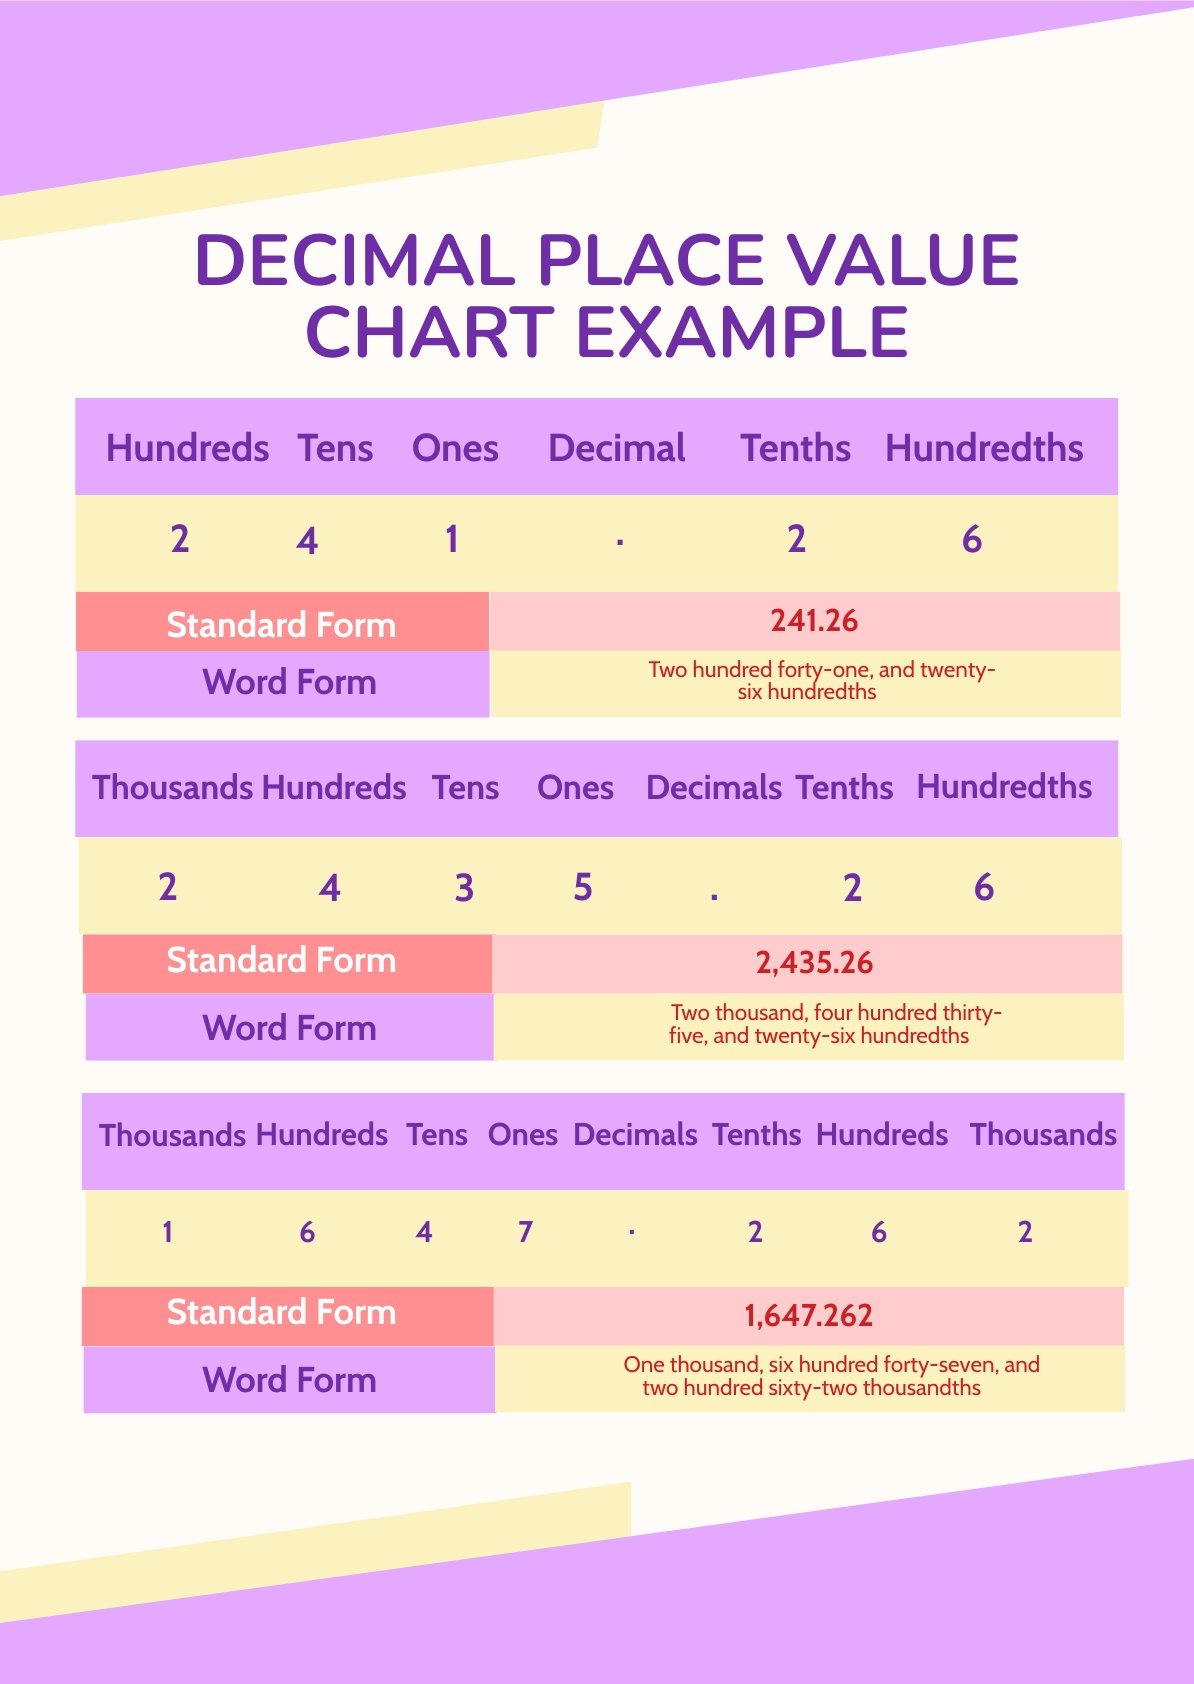 Decimal Place Value Chart Example